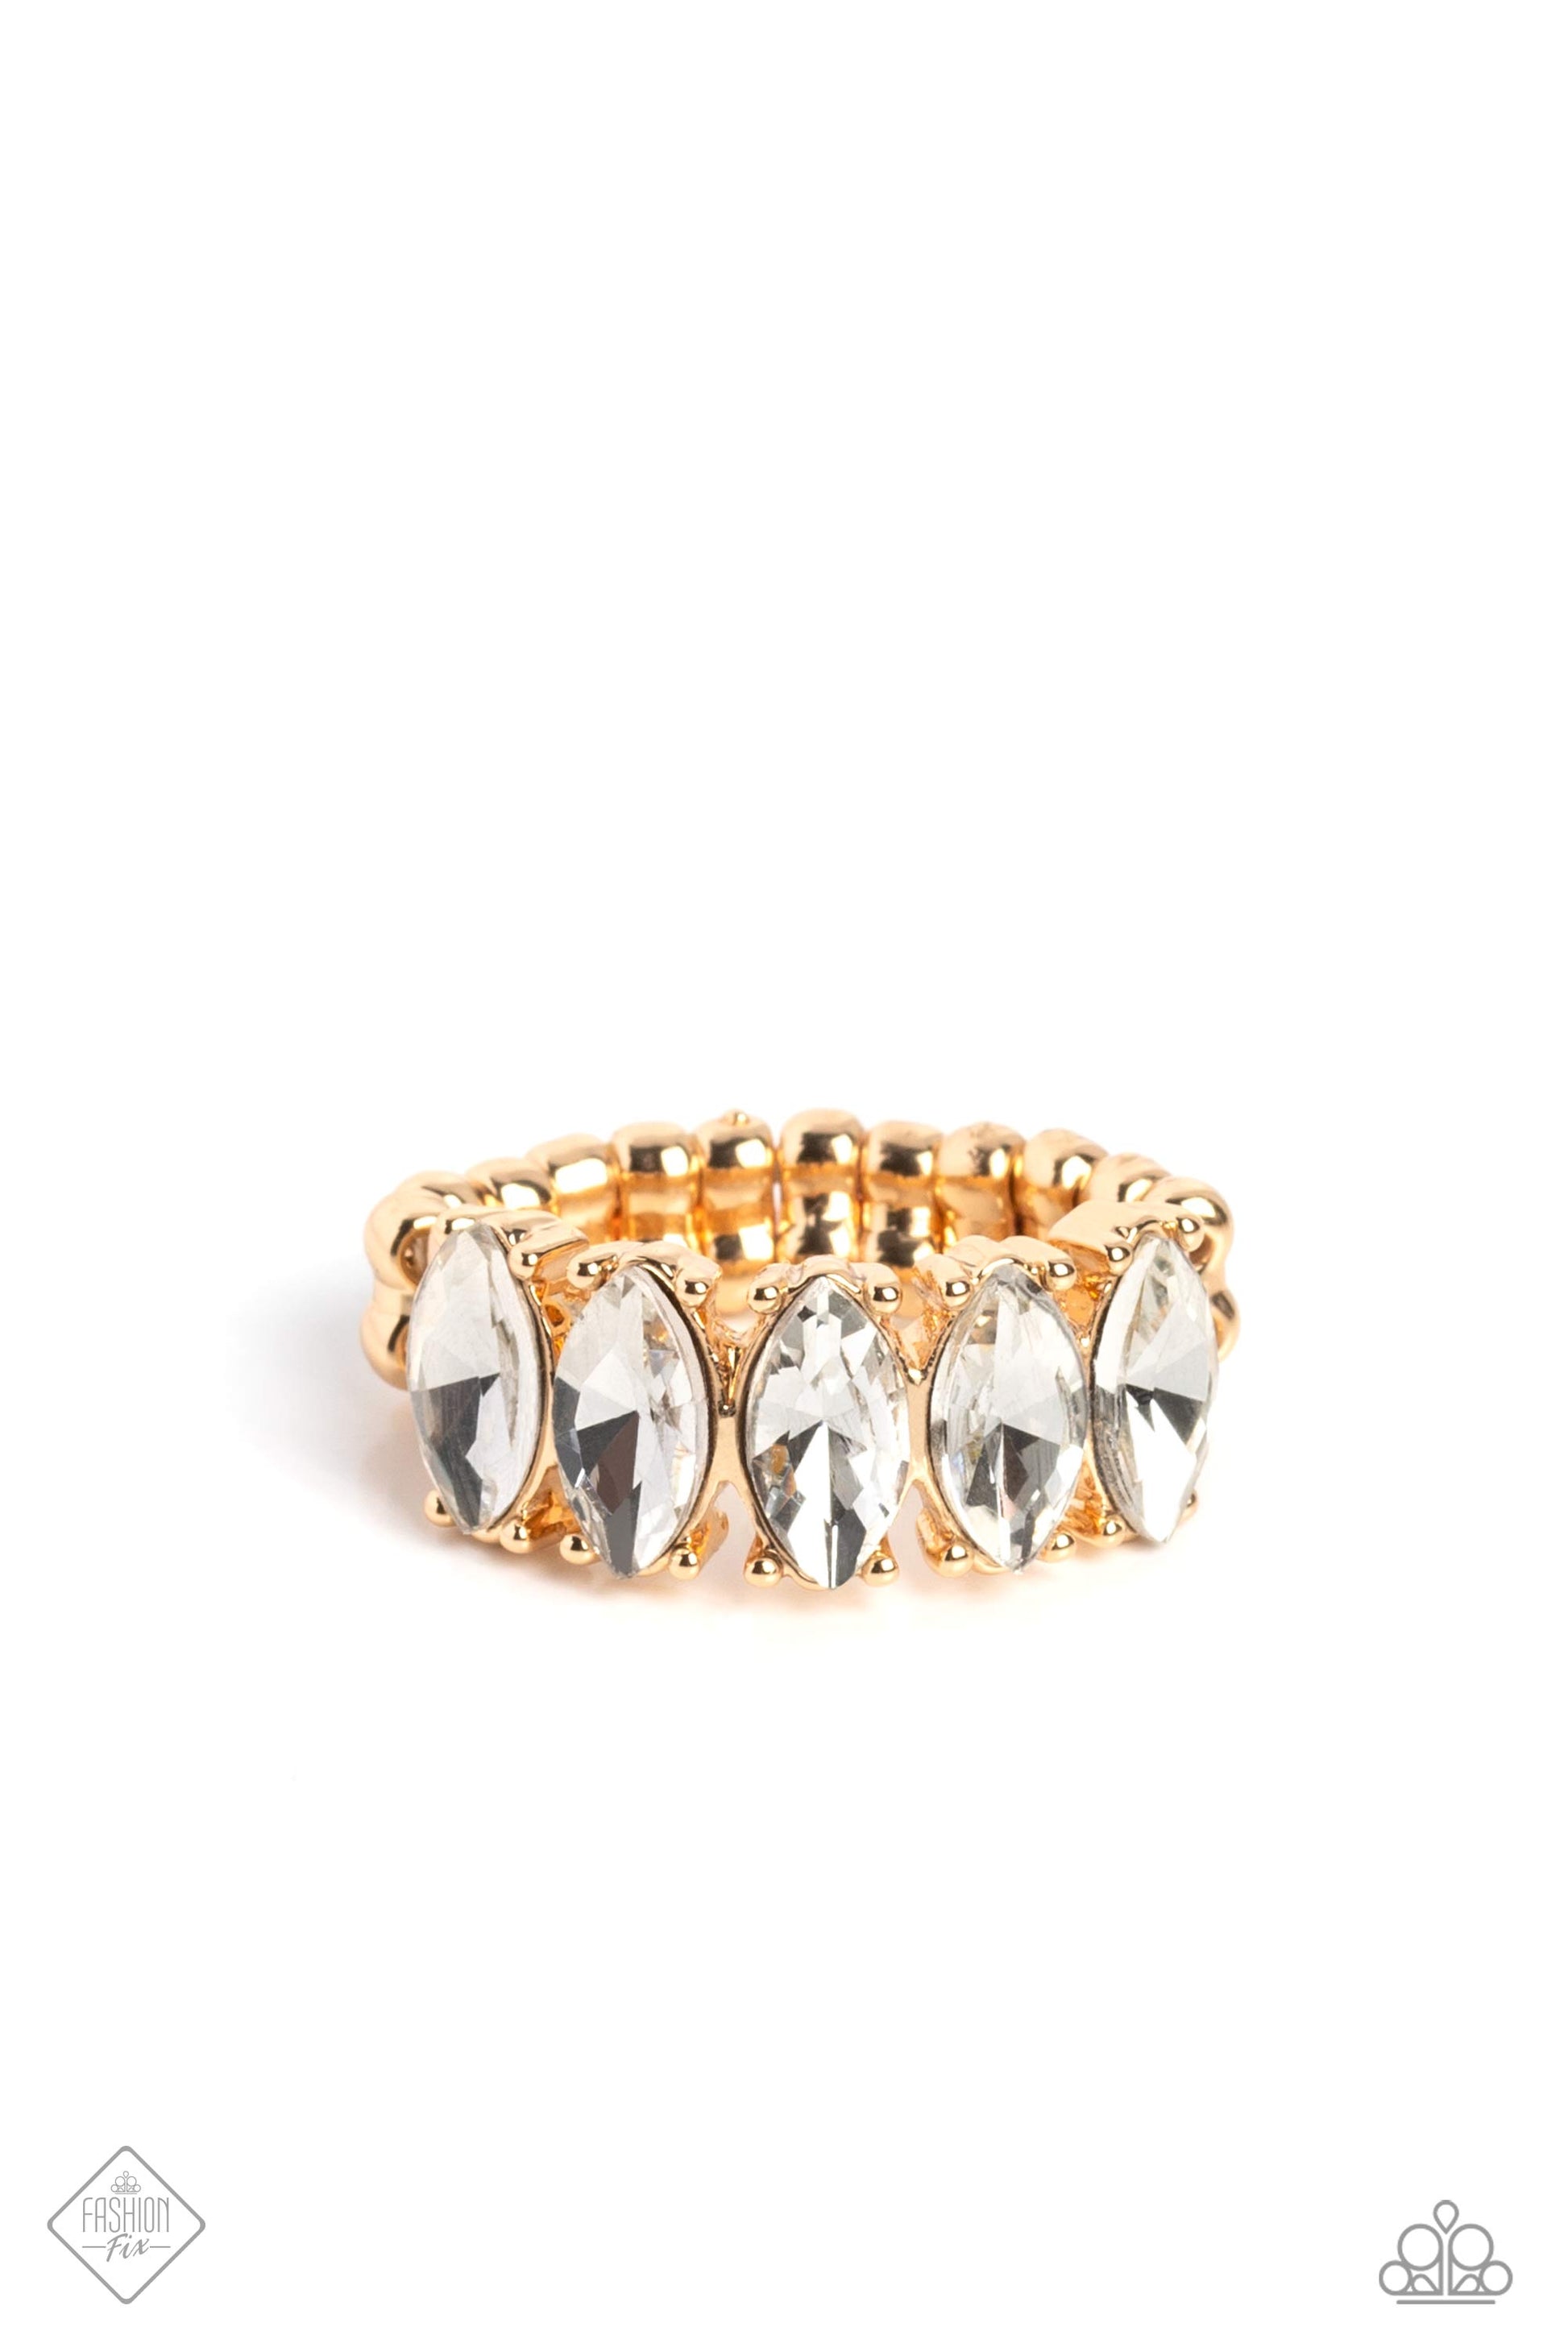 Lavish Lure - Gold Fashion Ring - Paparazzi Accessories - Exaggerated white marquise-cut gems are set atop pronged gold fittings, that arc across the finger in a linear pattern for a scintillating shimmer. Features a stretchy band for a flexible fit. Sold as one individual ring.